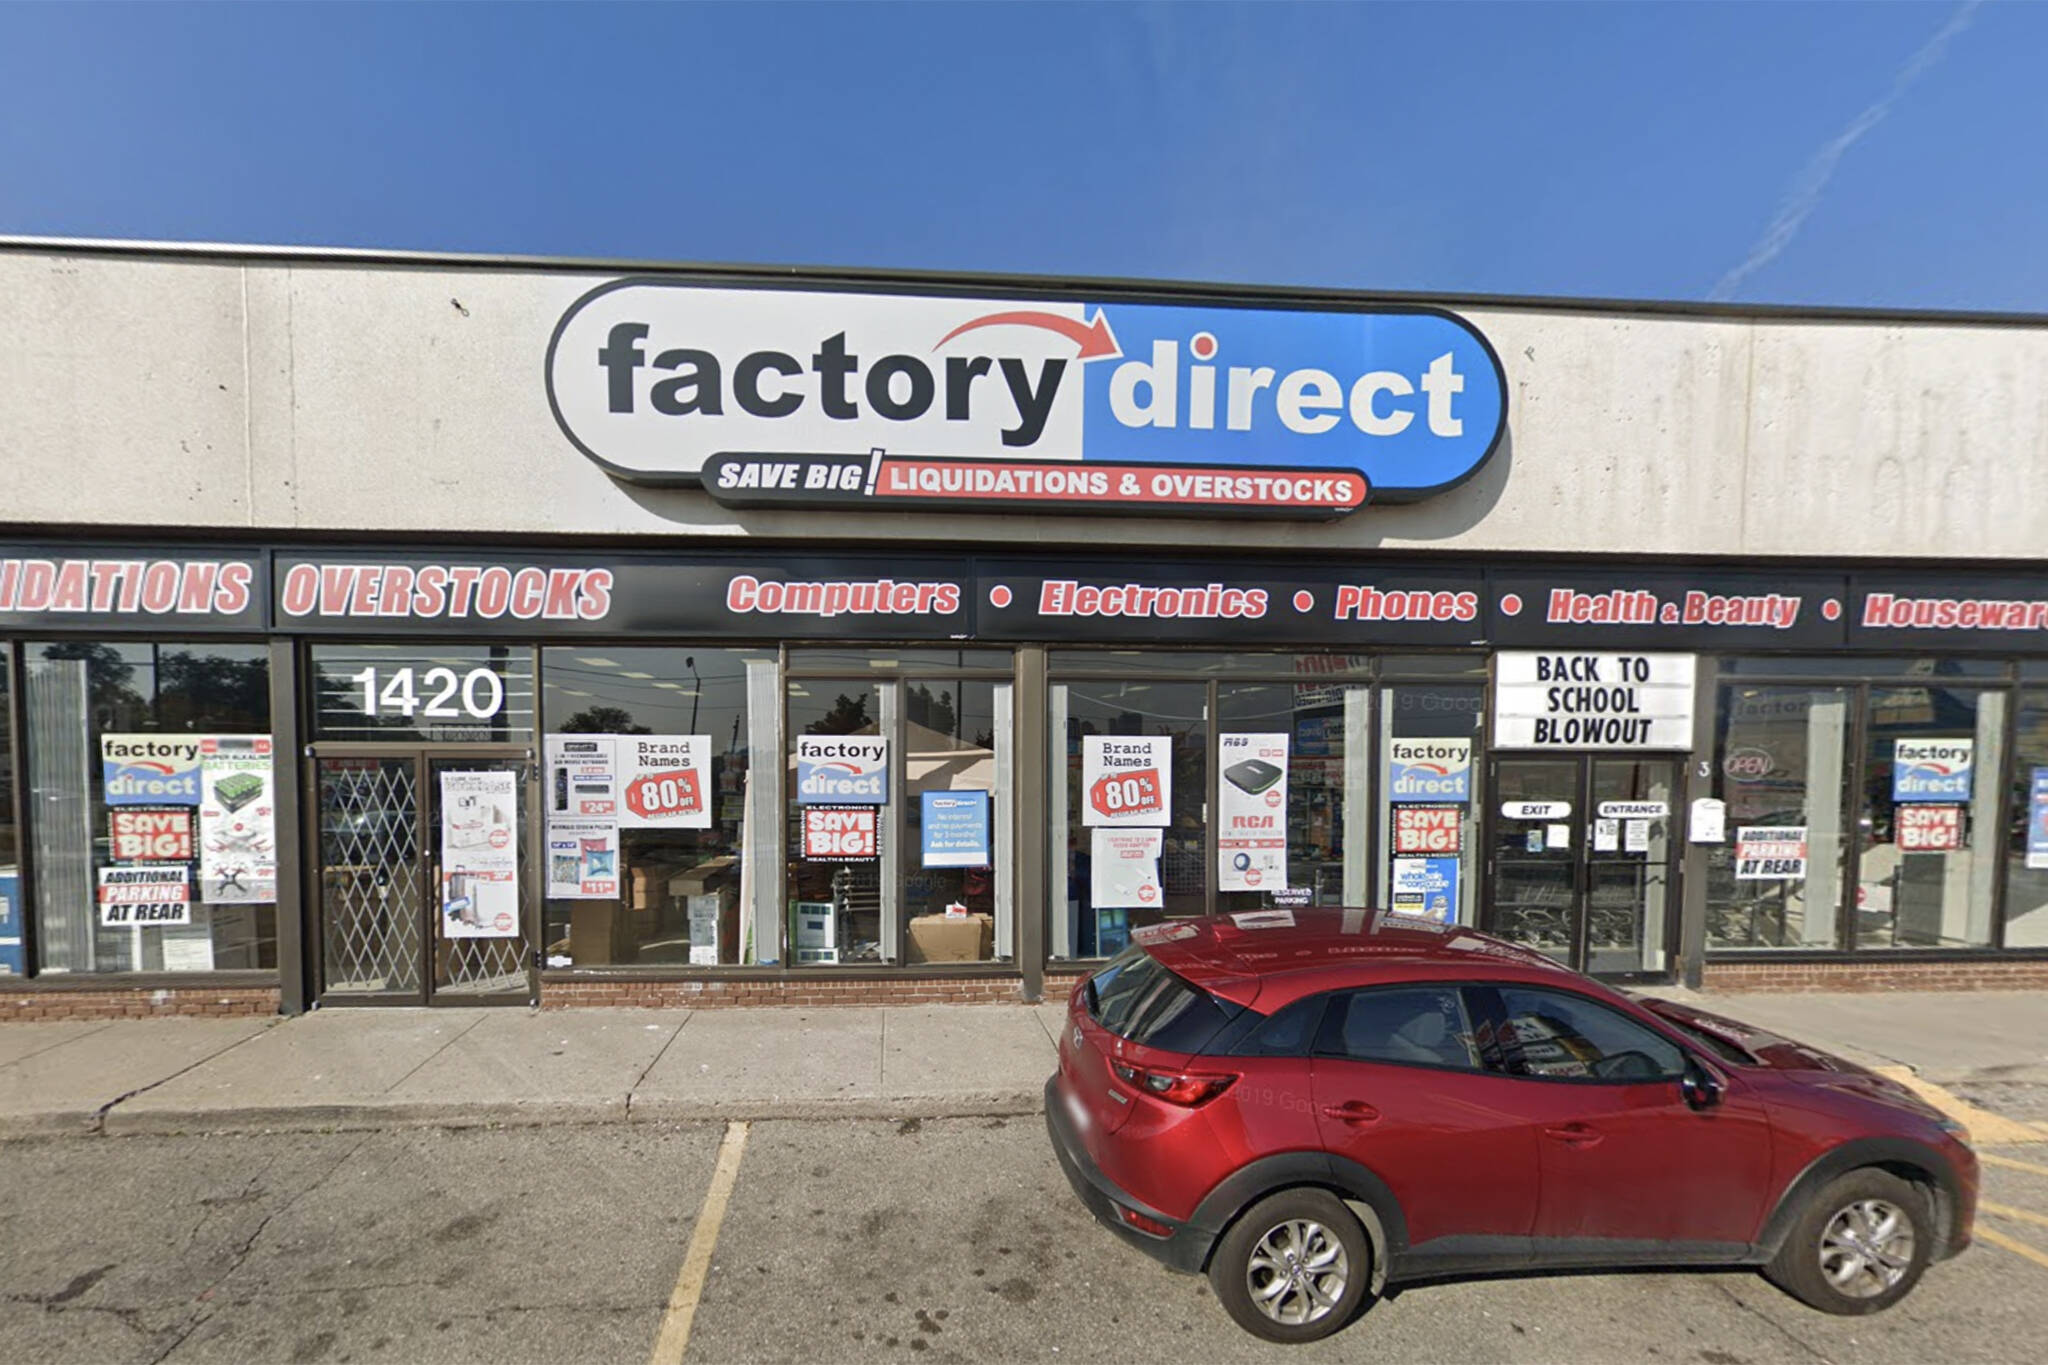 factory direct